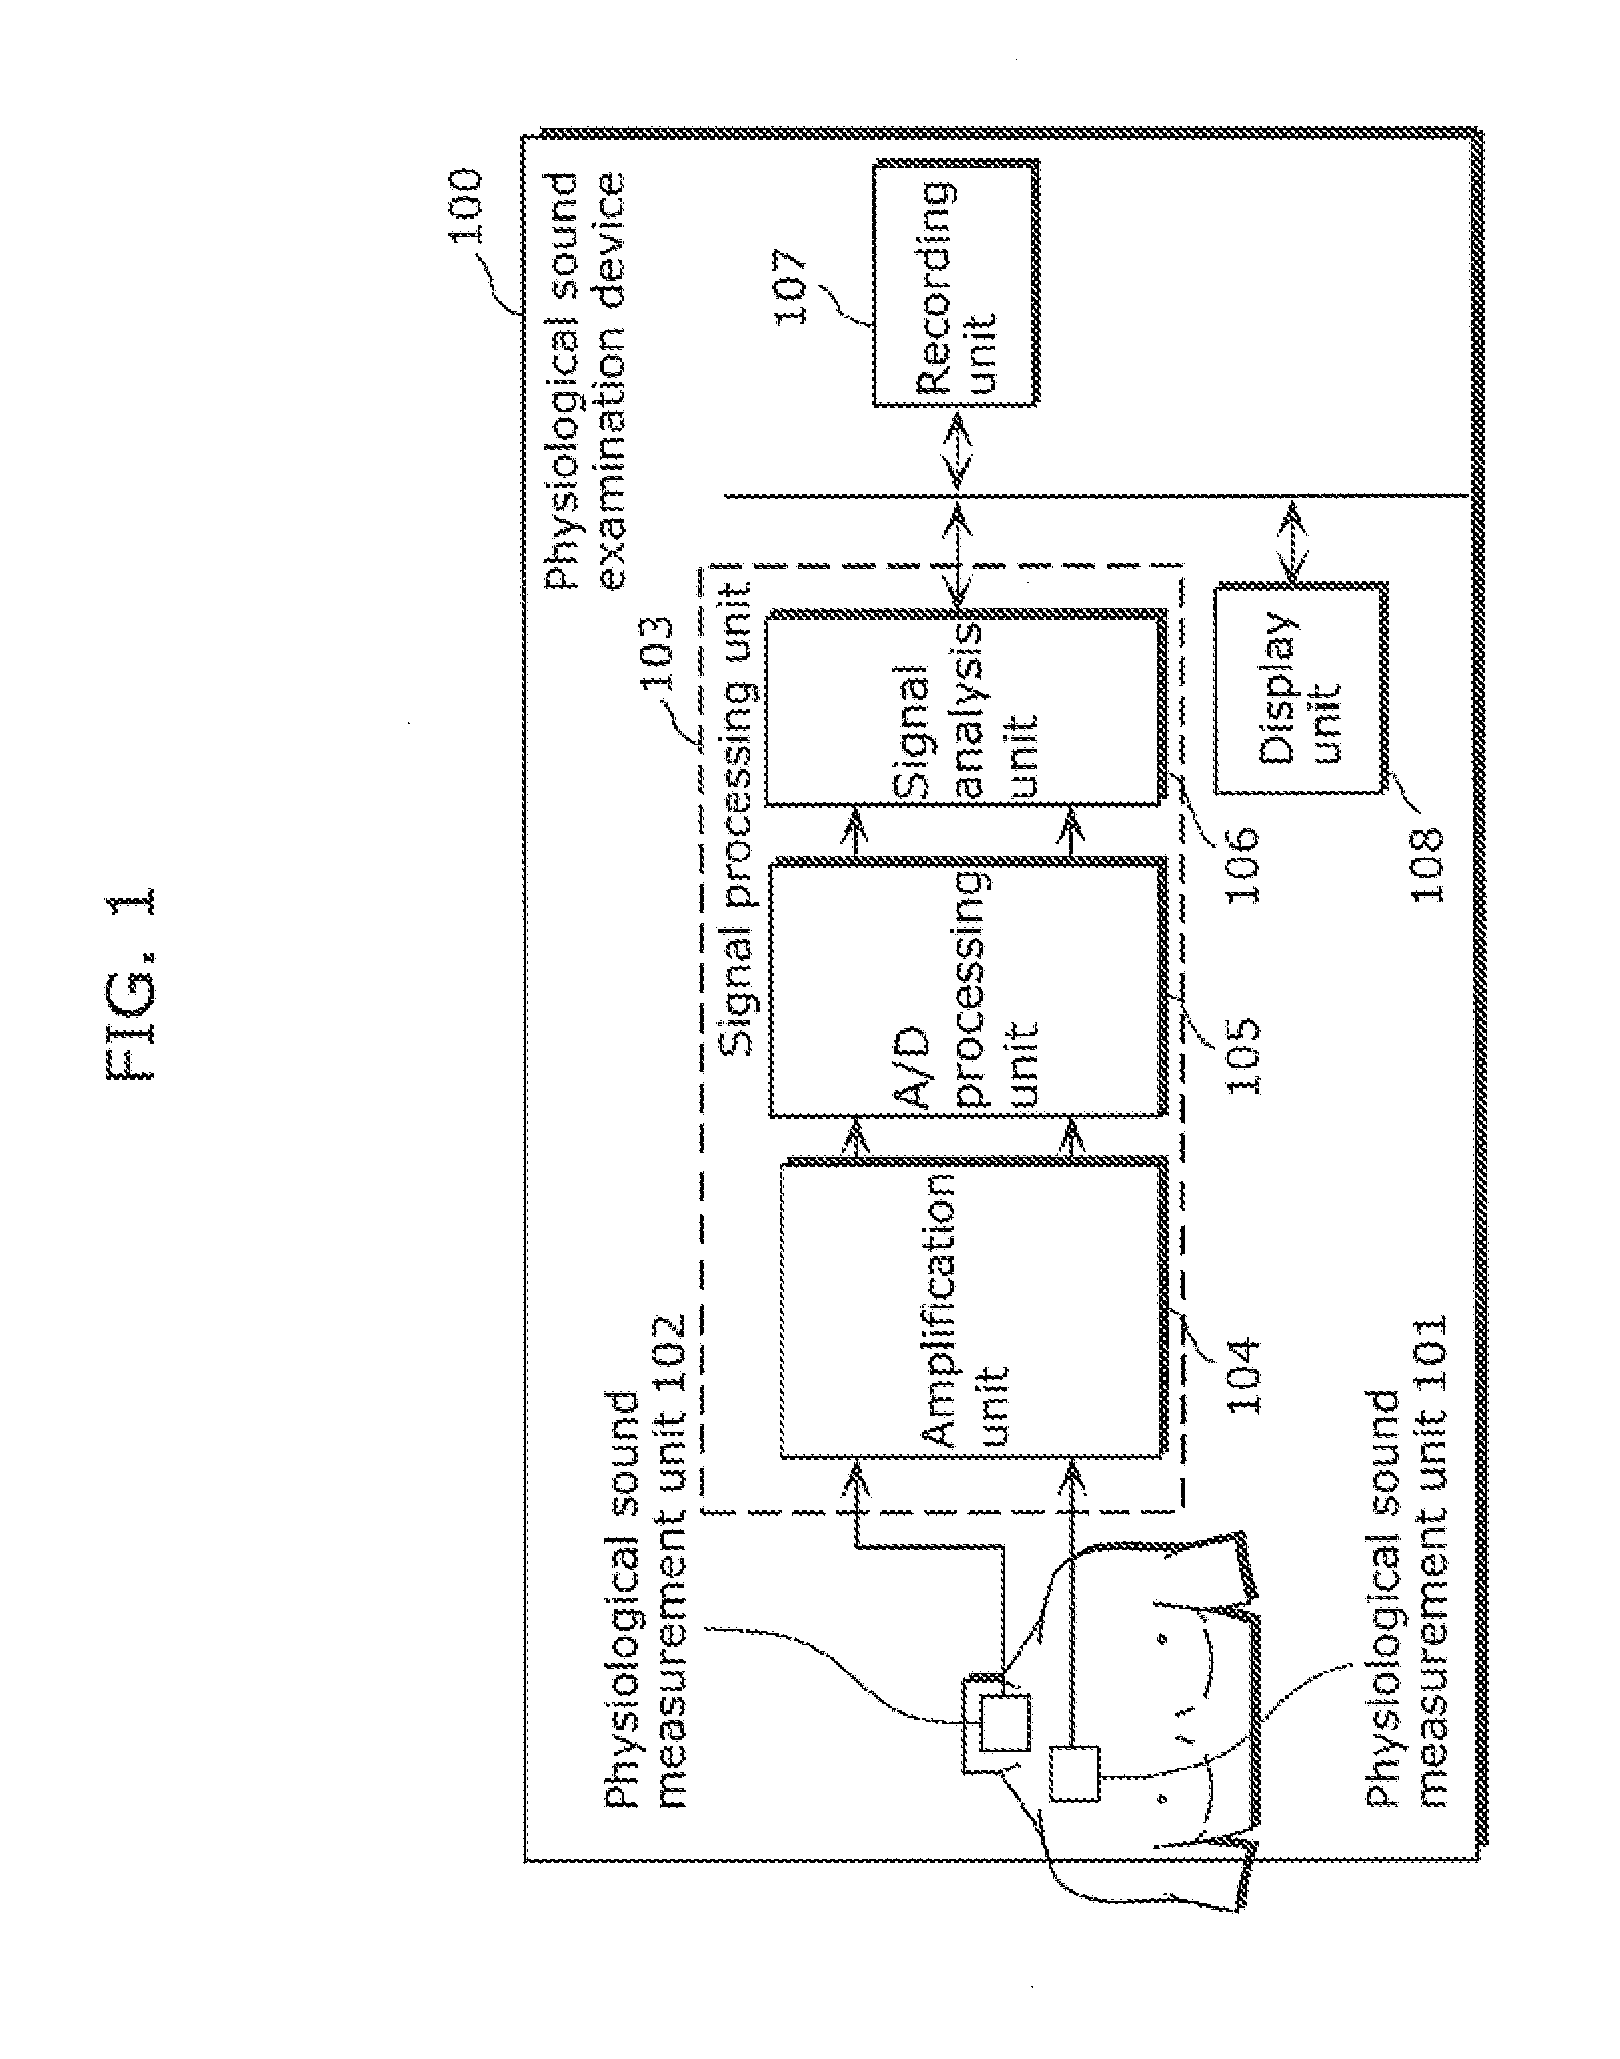 Physiological sound examination device and physiological sound examination method